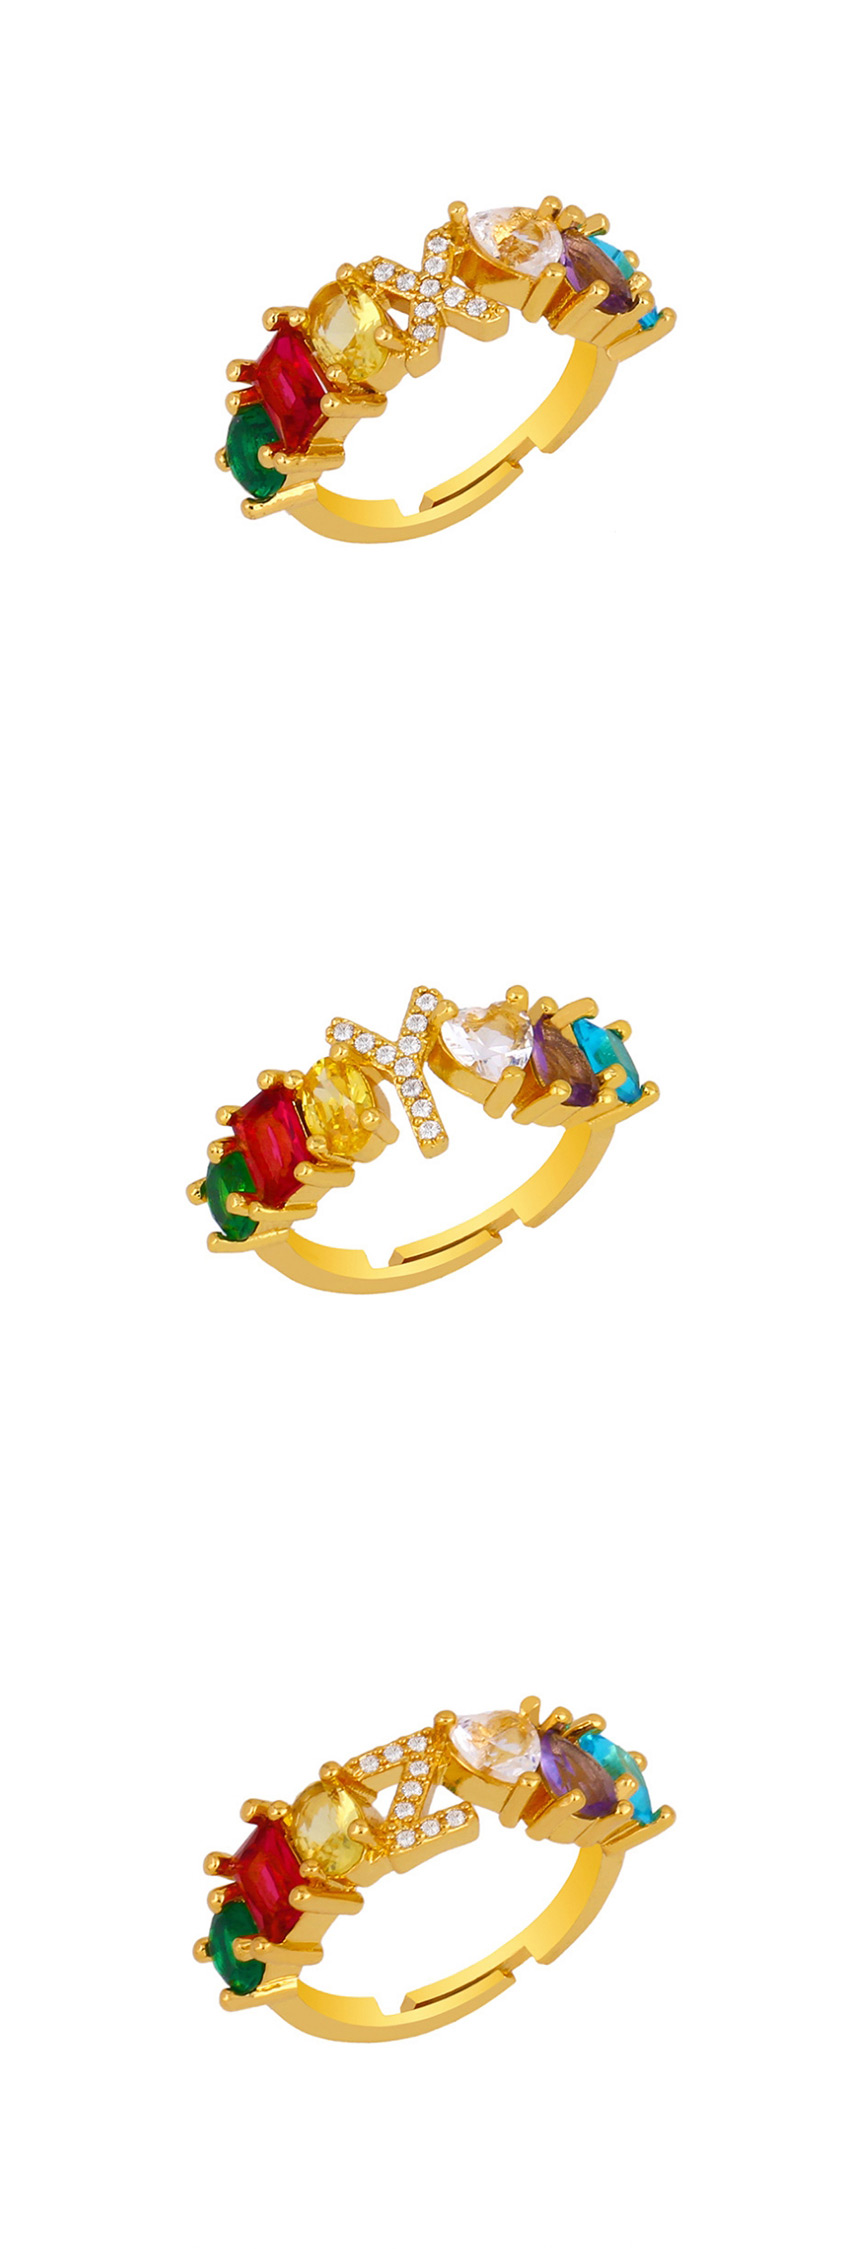 Fashion Z Gold Heart-shaped Adjustable Ring With Colorful Diamond Letters,Rings